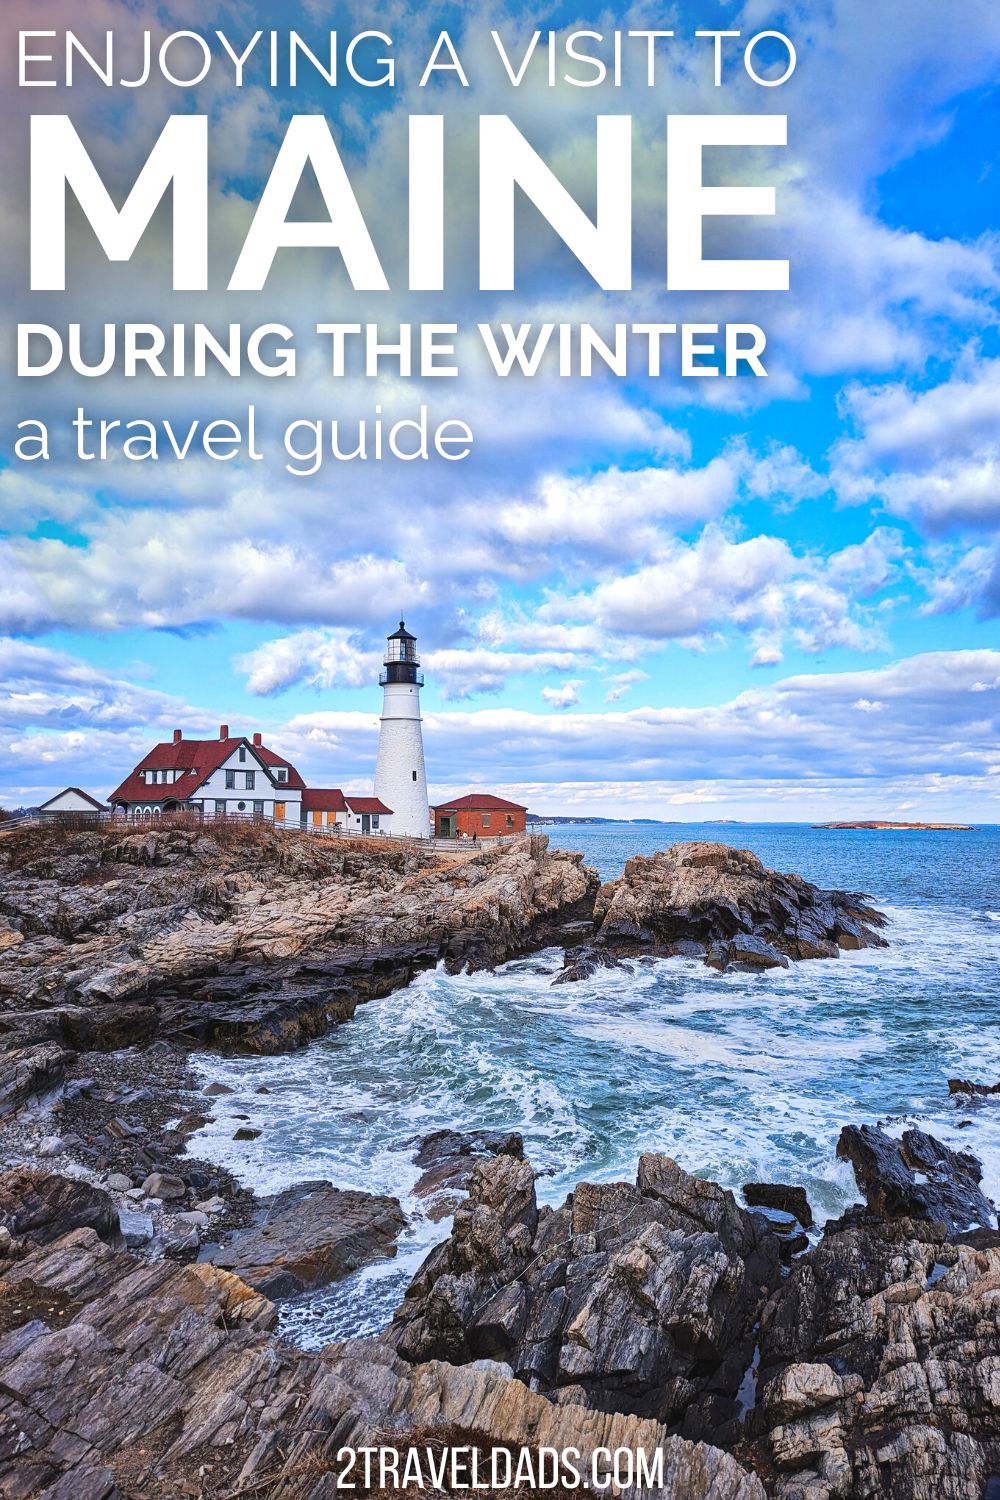 If you love snow, good food and the coastal vibe, visiting Maine in winter is for you! This guide to off-season travel to Portland and Midcoast Maine is ideal for enjoying the outdoors, museums and lighthouses along the coast. Recommendations for where to stay and how to plan a winter trip to Maine.